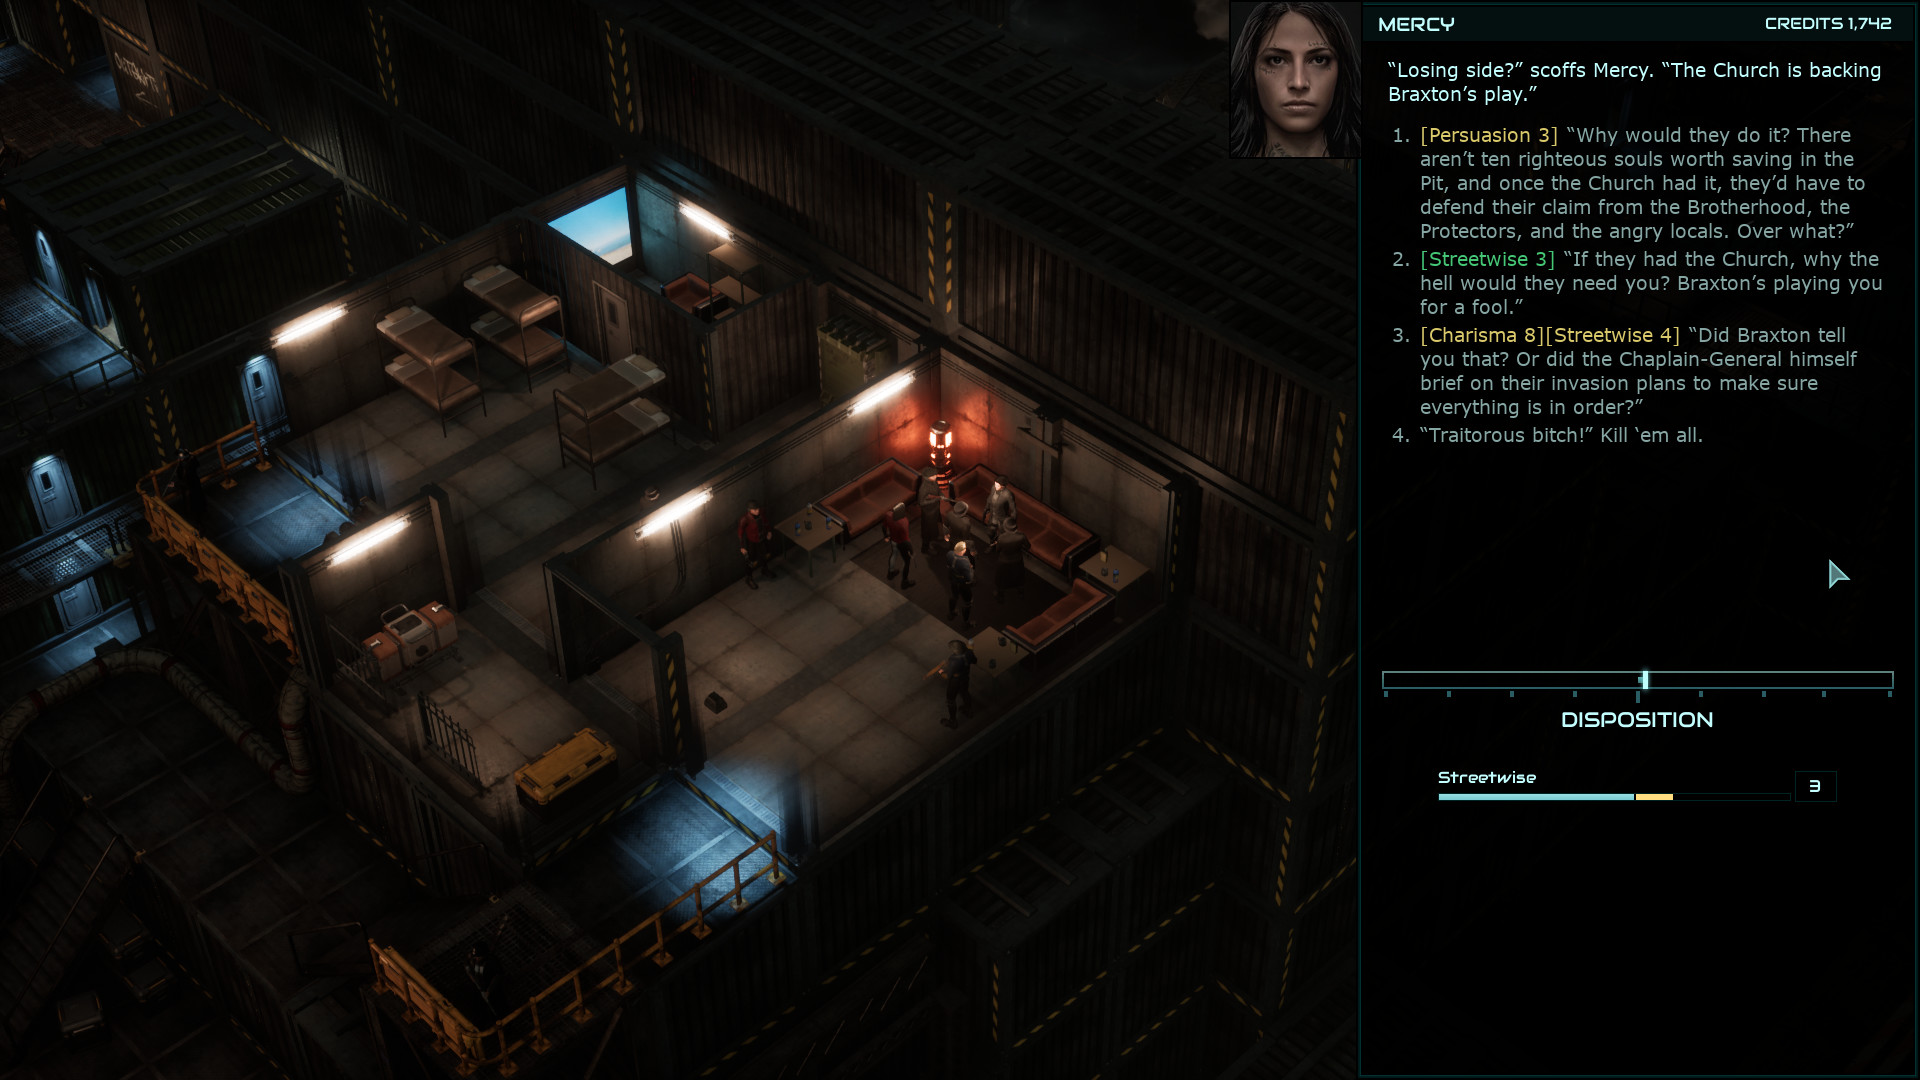 Colony Ship: A Post-Earth Role Playing Game Steam Altergift